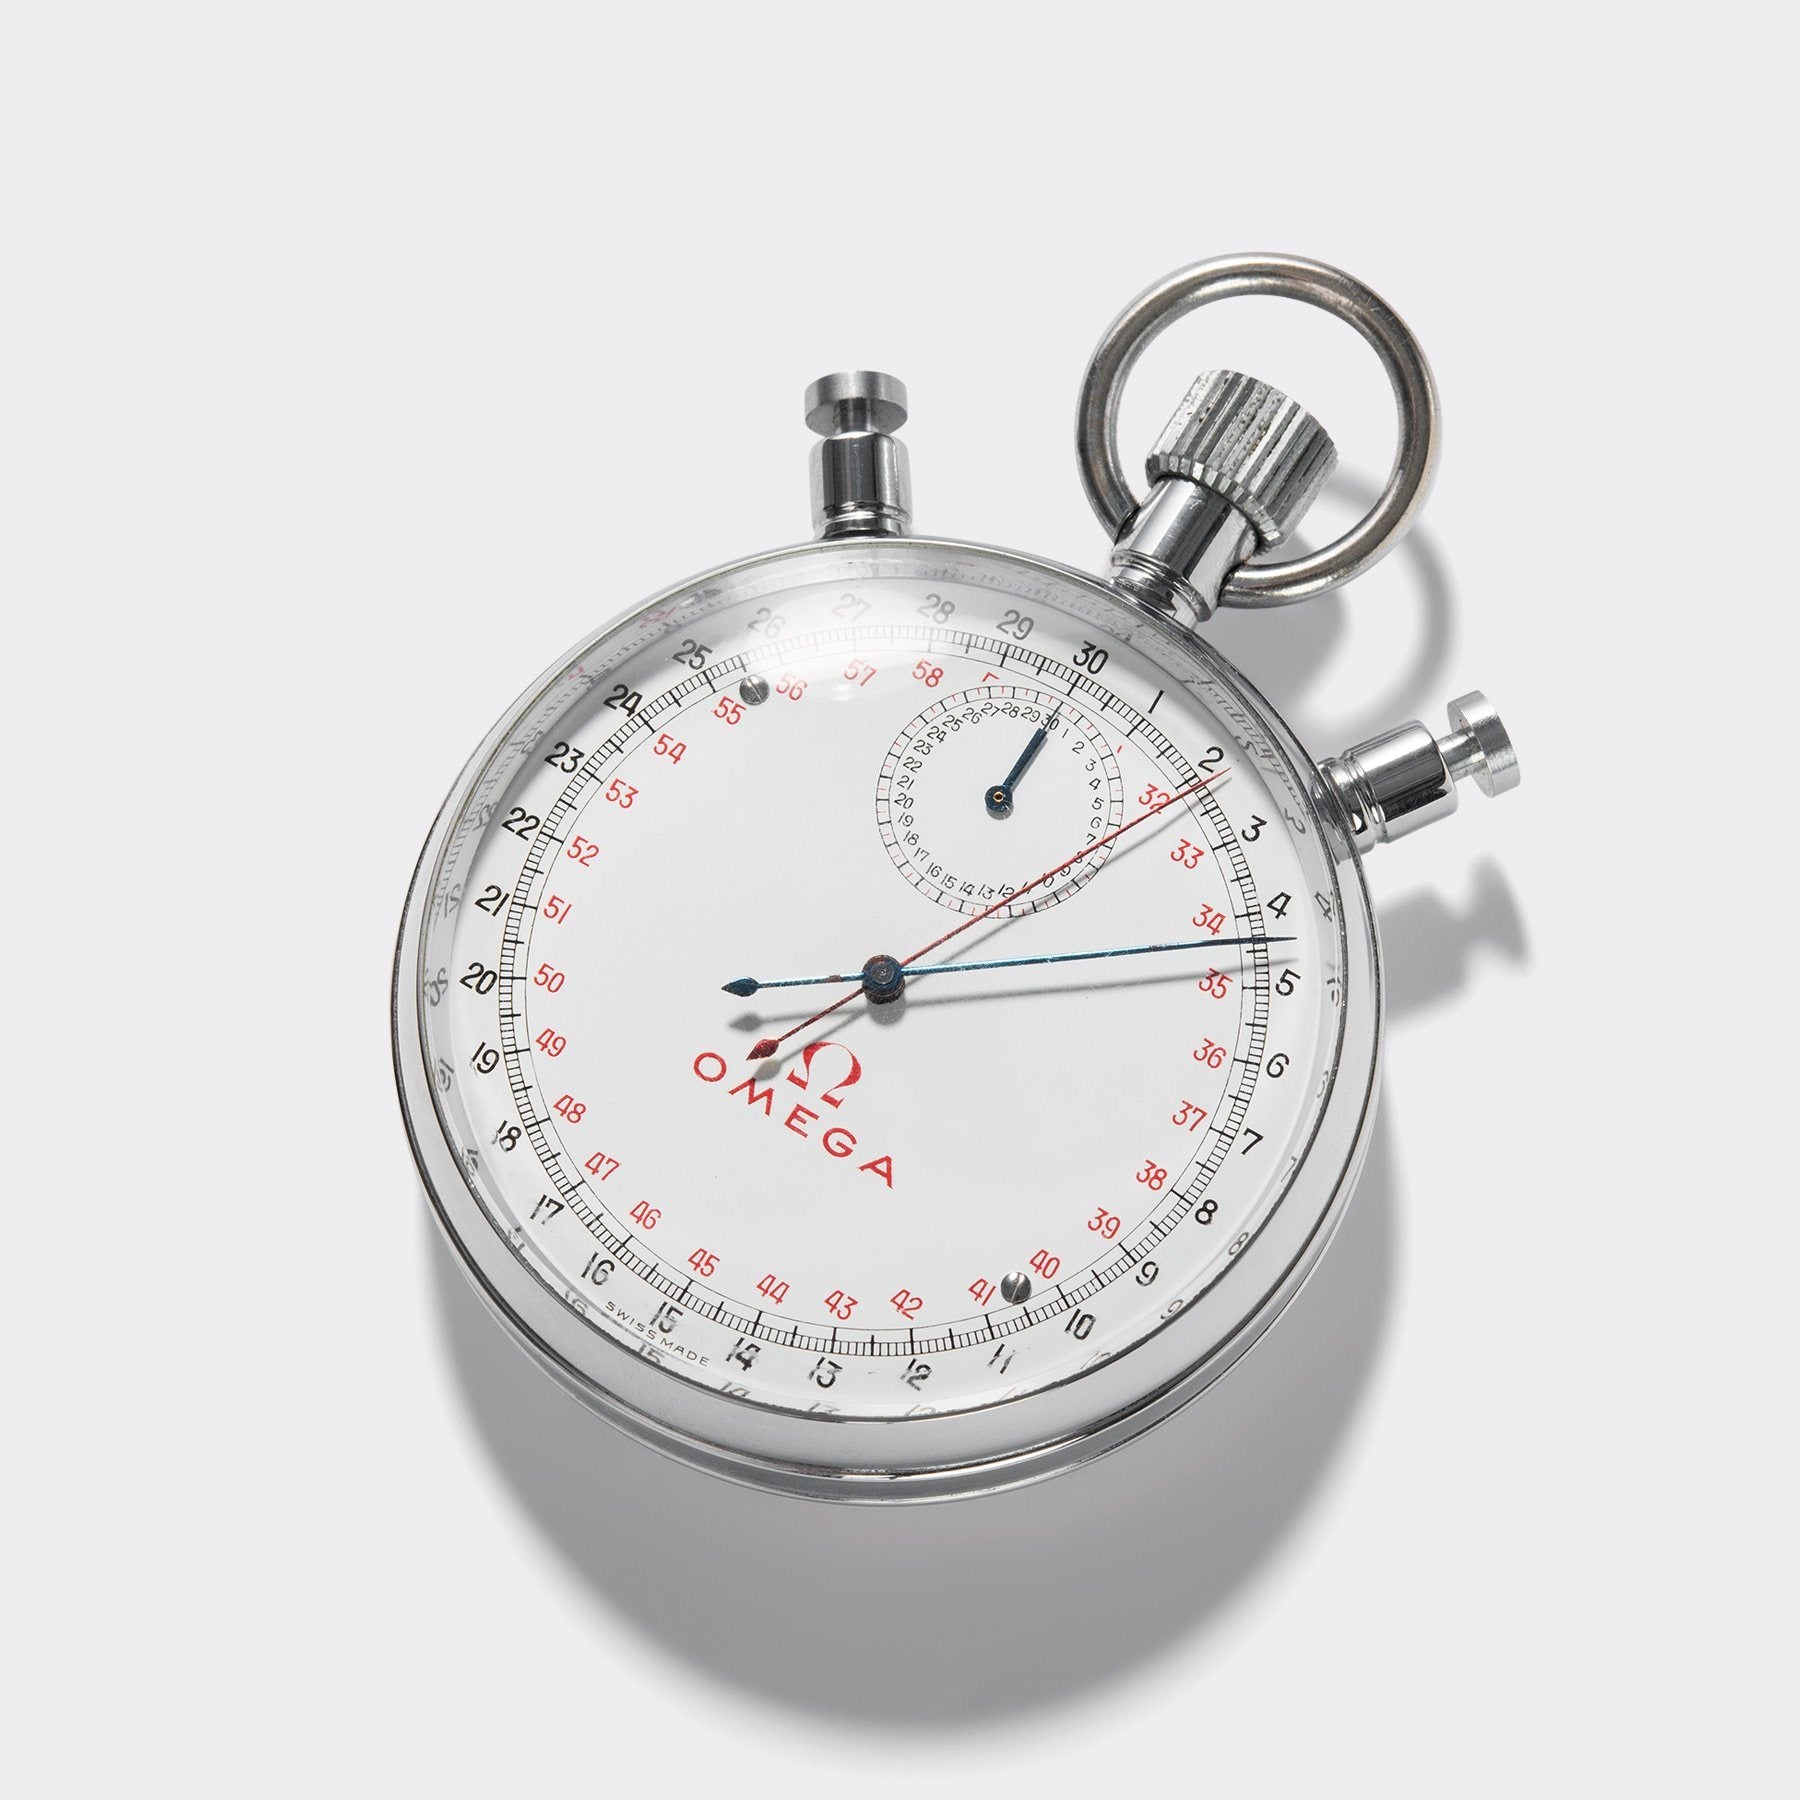 Silver 2047 Stop Watch, For Laboratory,Sports at best price in Delhi | ID:  26166655373